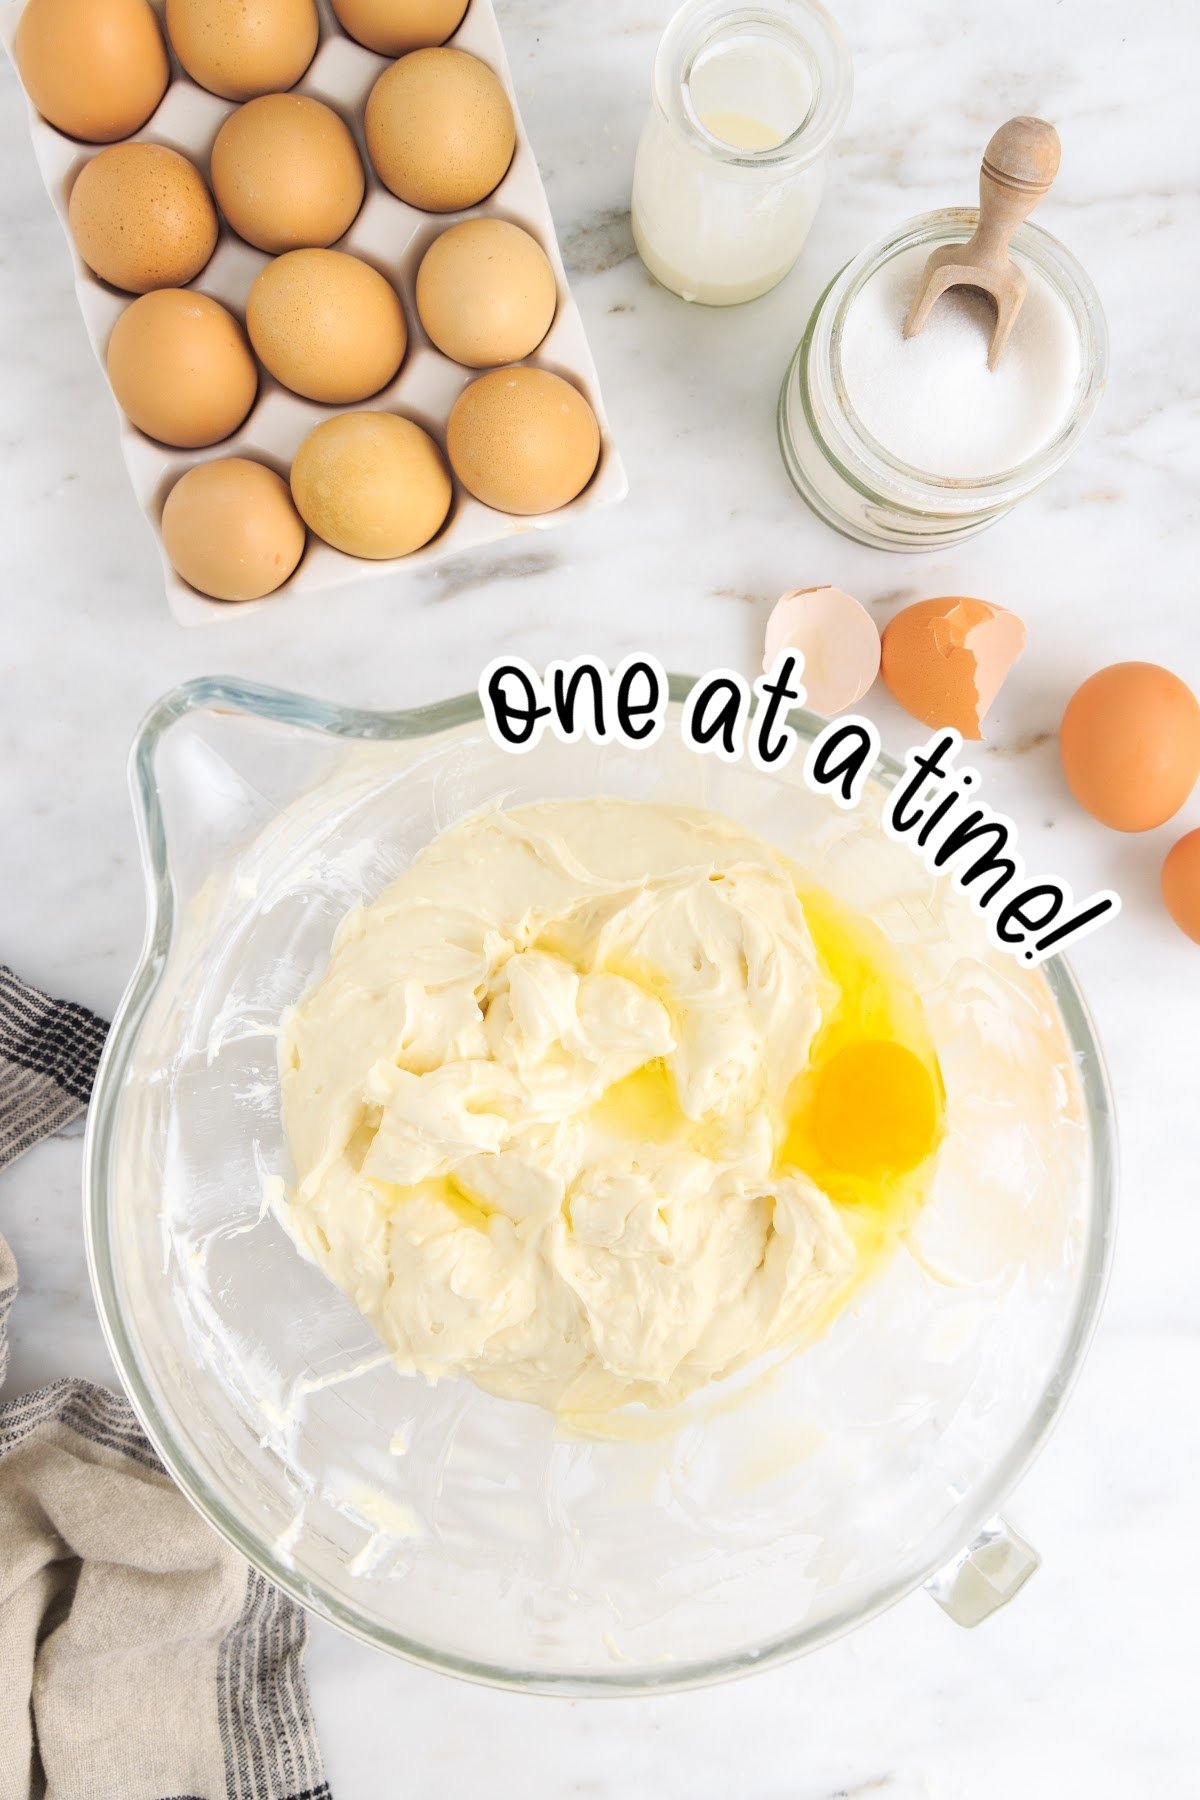 Eggs added to cream cheese mixture one at a time with text overlay.